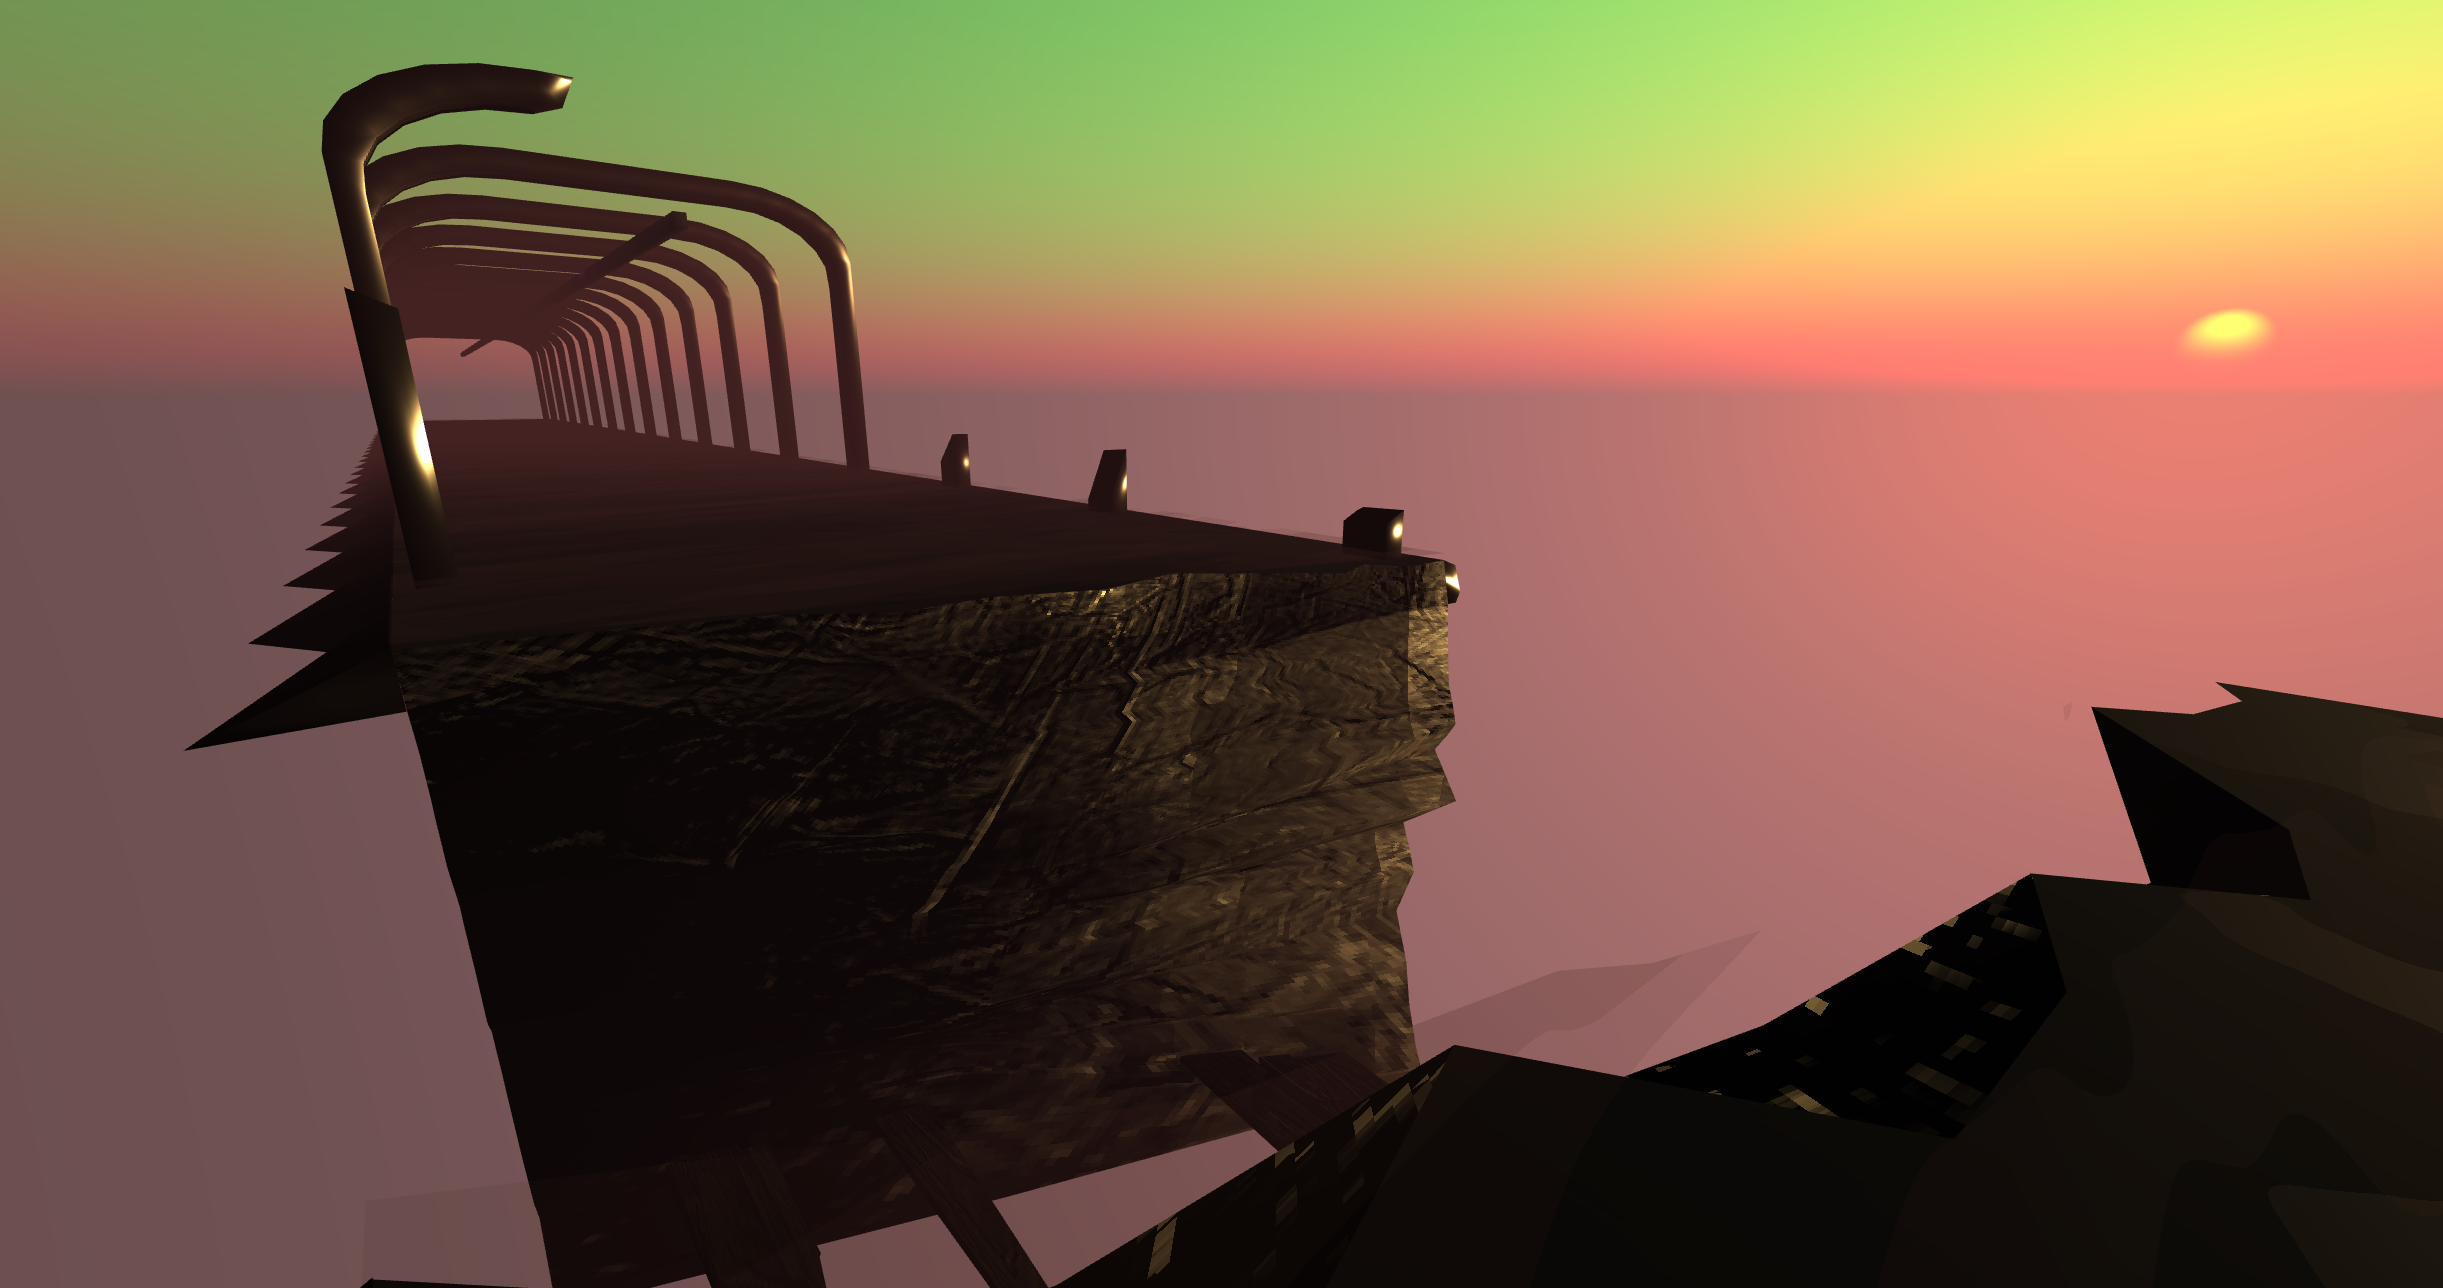 A screenshot of one of the 3D game-like demos I've been working on.  Shows a floating bridge with a pixelated texture and some metal arches, a brightly-colored green and red sky, and maroon fog over the bridge's surface